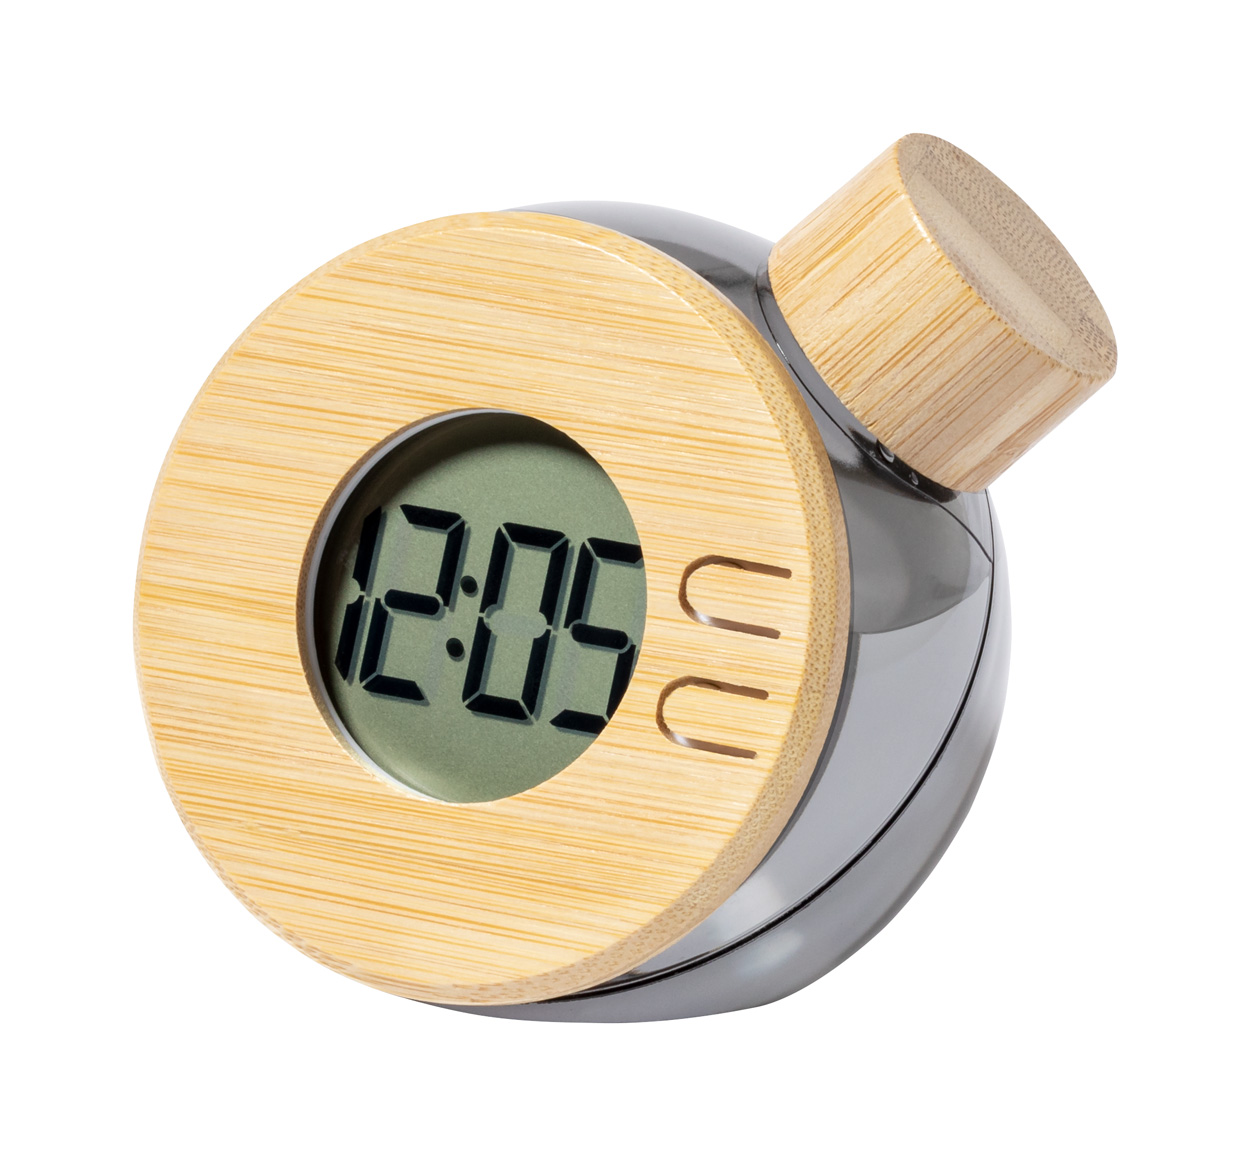 Water-powered table clock GRAOX - natural